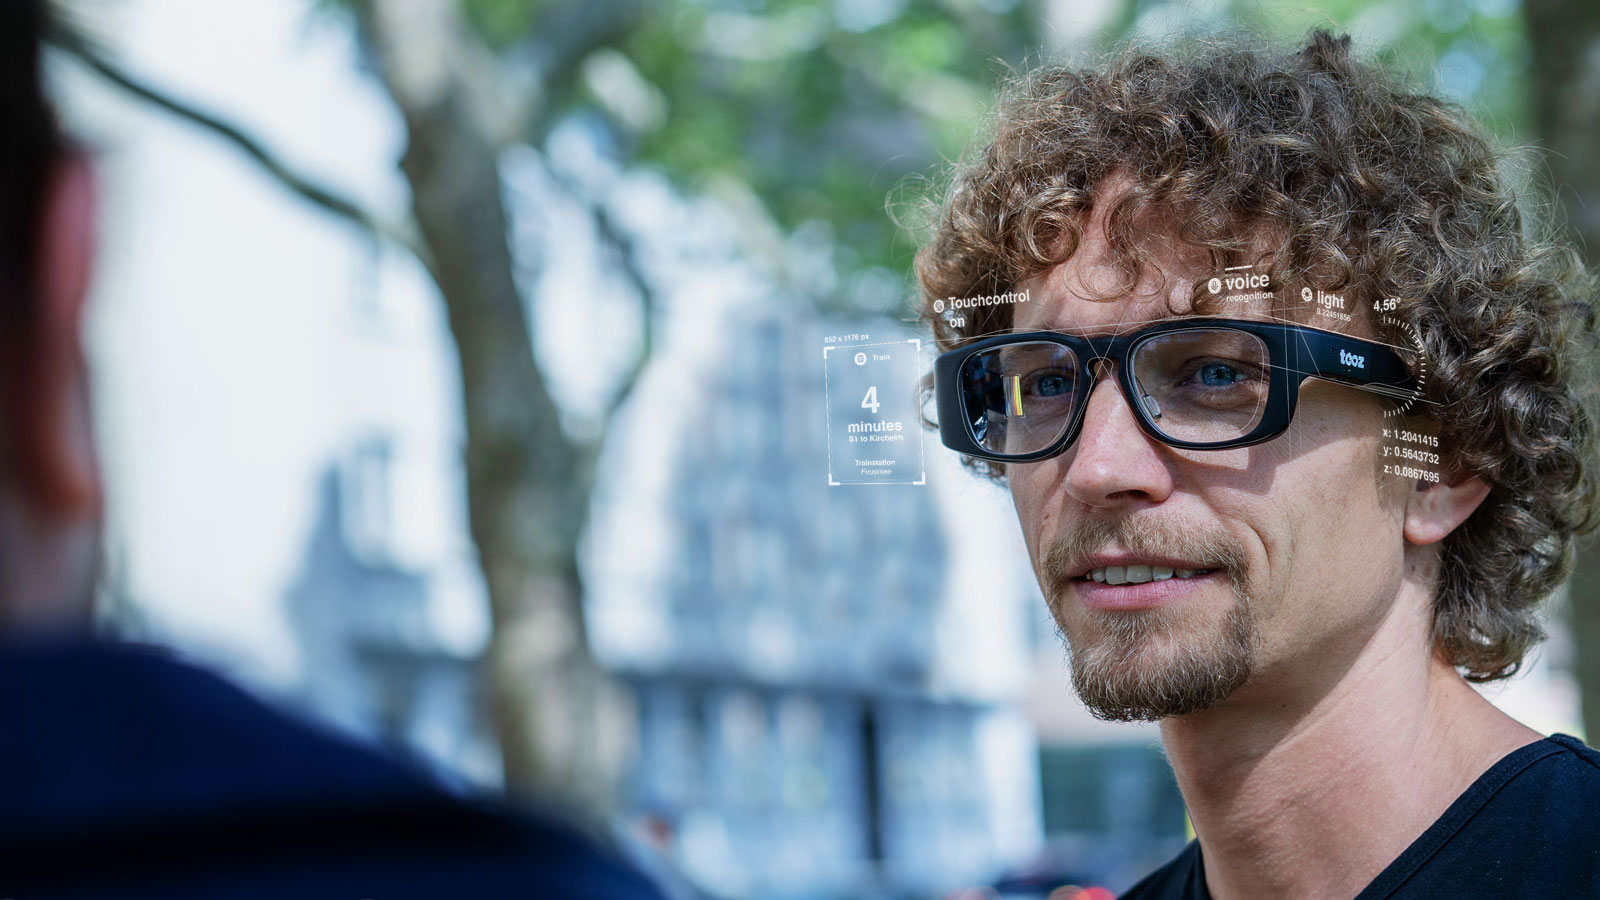 tooz Dev Kit – overcoming the chicken and egg situation of smart glasses